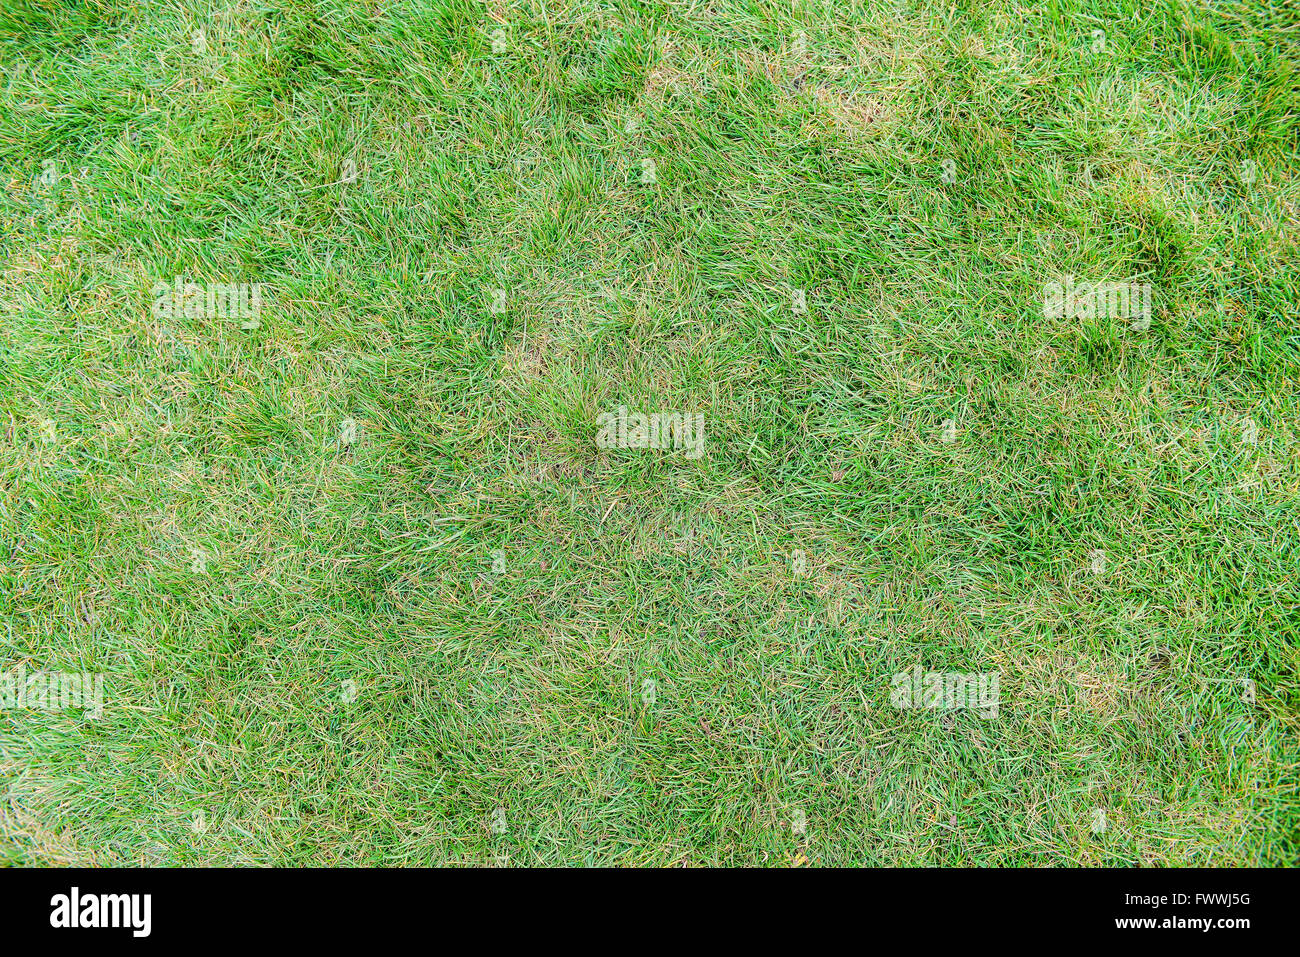 top view of grass field Stock Photo